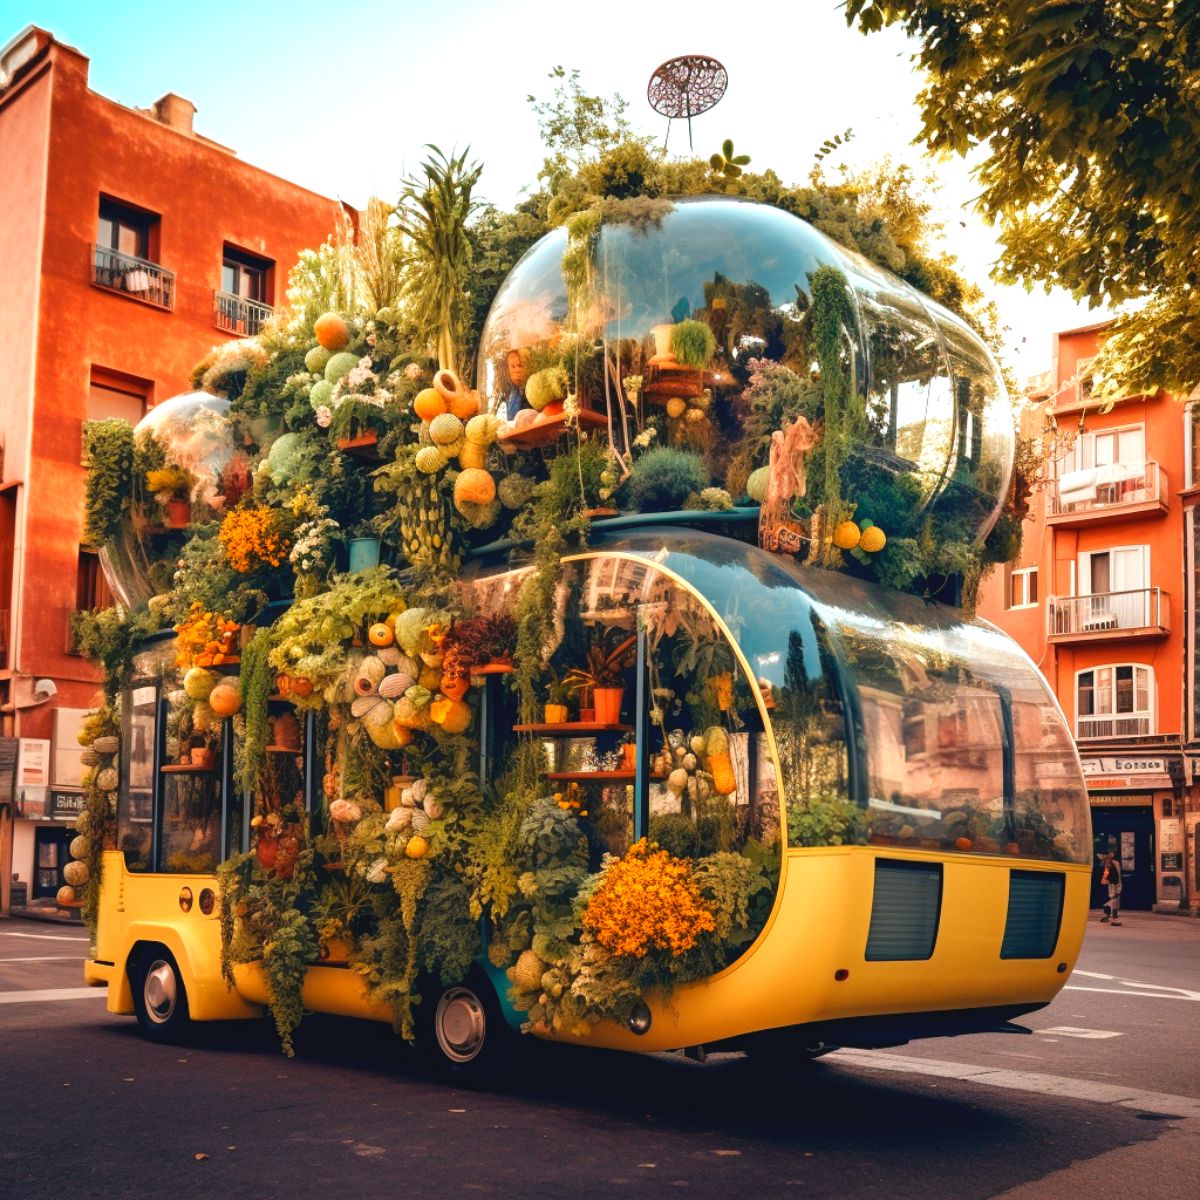 Different bus and plant designs by Emilio Alarcon